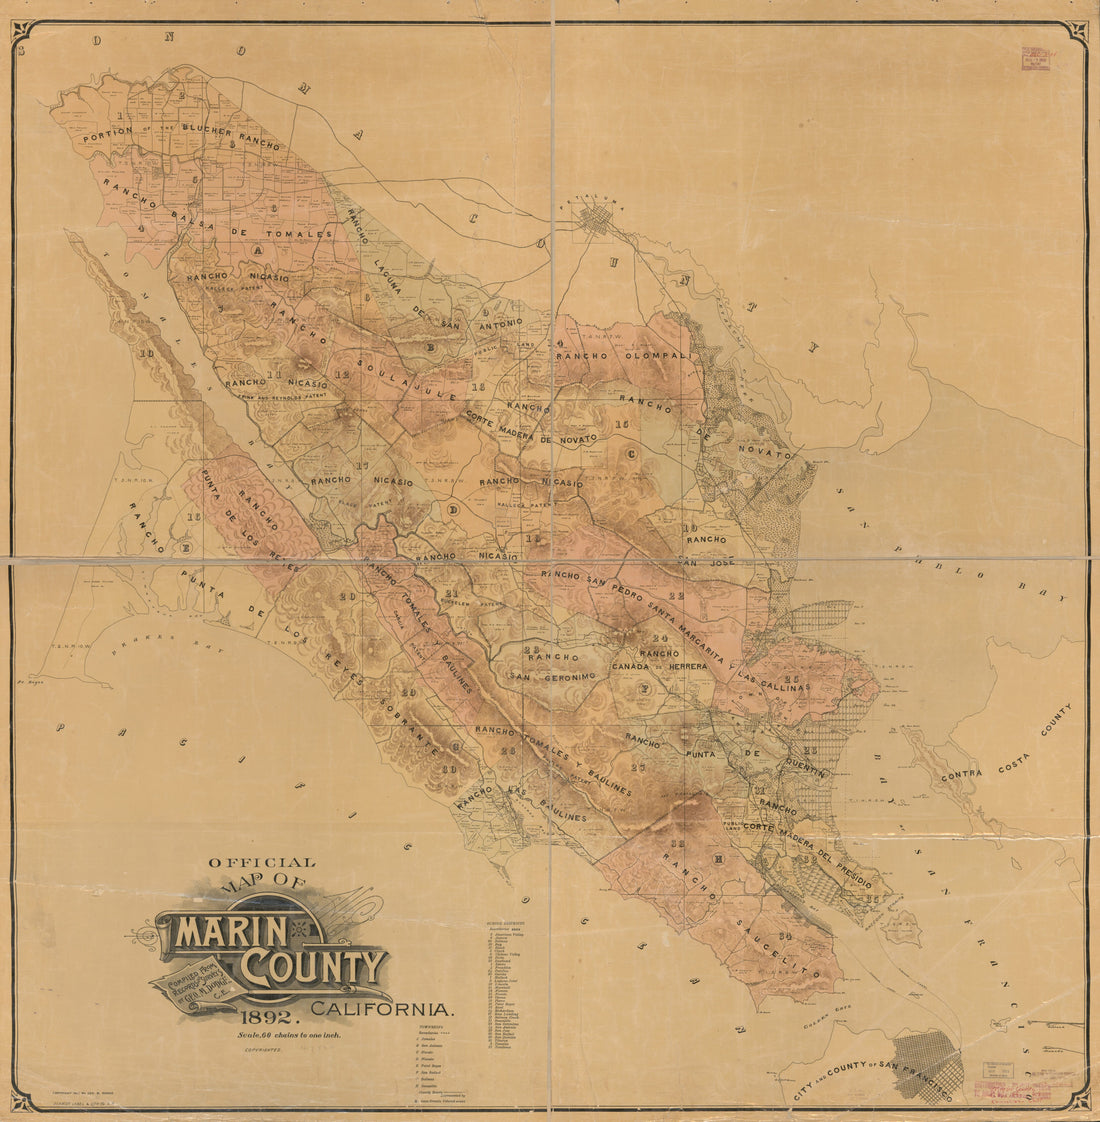 This old map of Official Map of Marin County, California from 1892 was created by Geo. M. (George M.) Dodge,  Schmidt Label &amp; Litho. Co in 1892